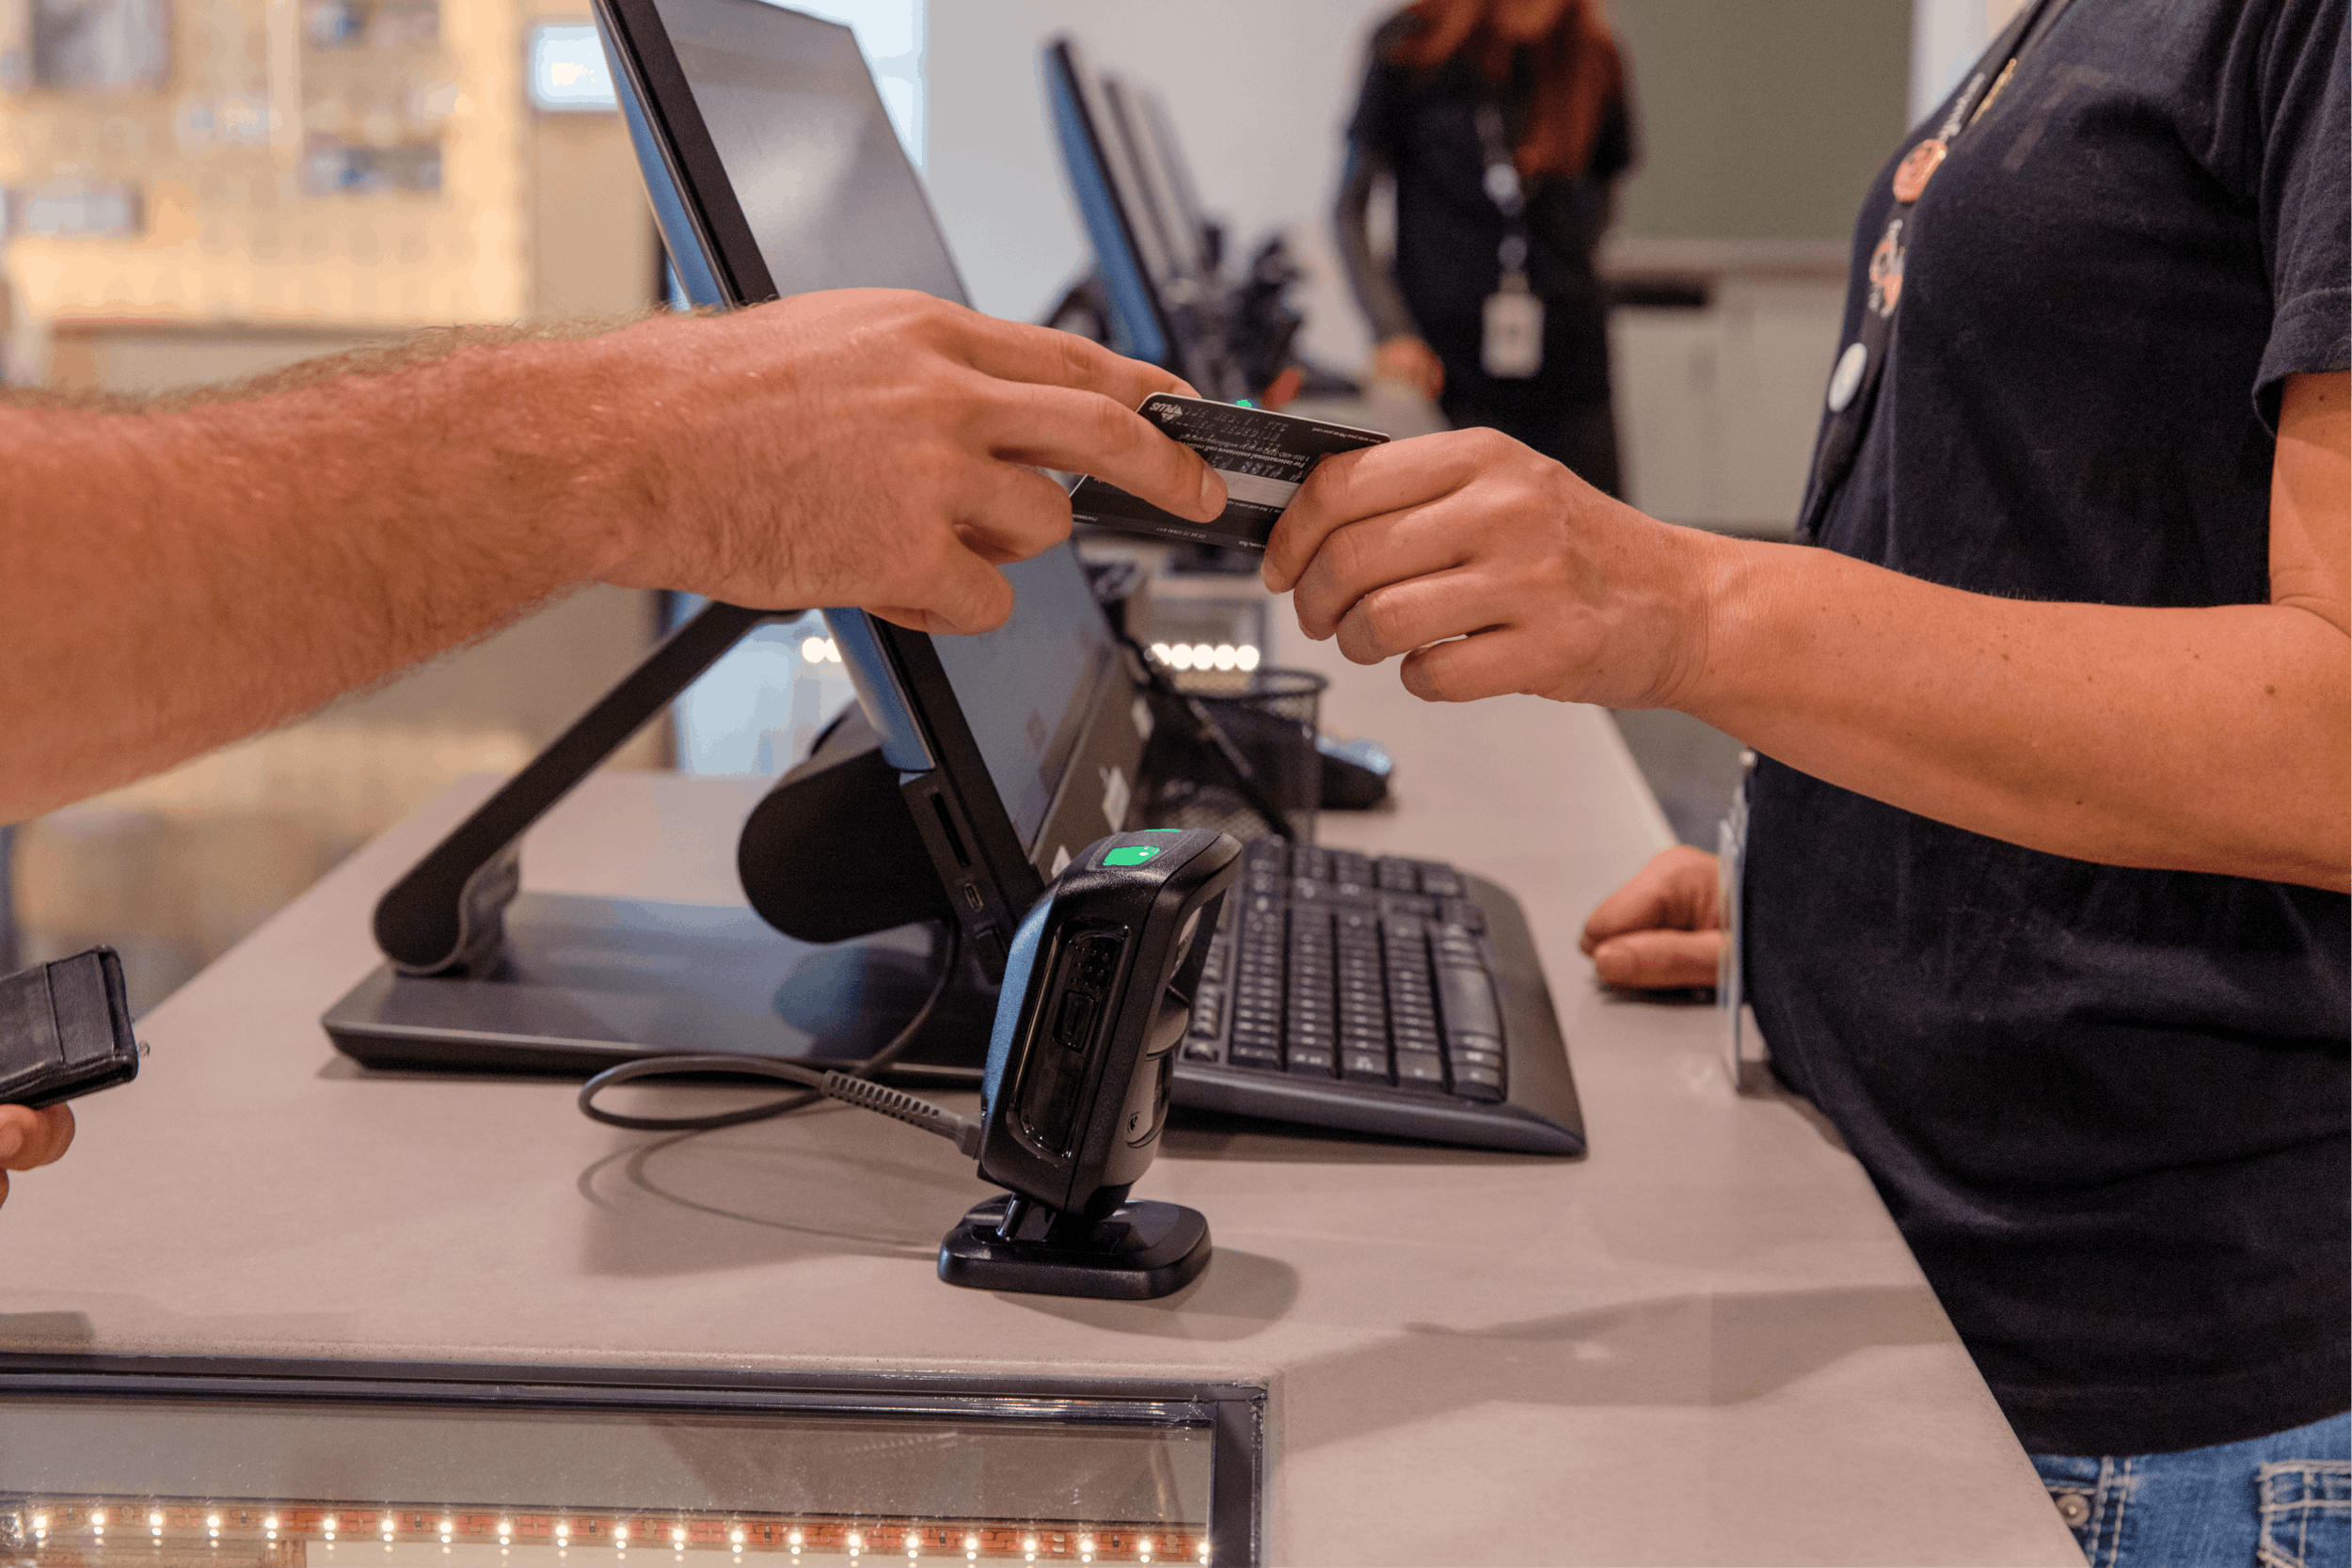 Two hands are shown surrounding a cannabis POS. One hand passes a debit or credit card to the sales associate budtender, to purchase cannabis products in a dispensary without using cash